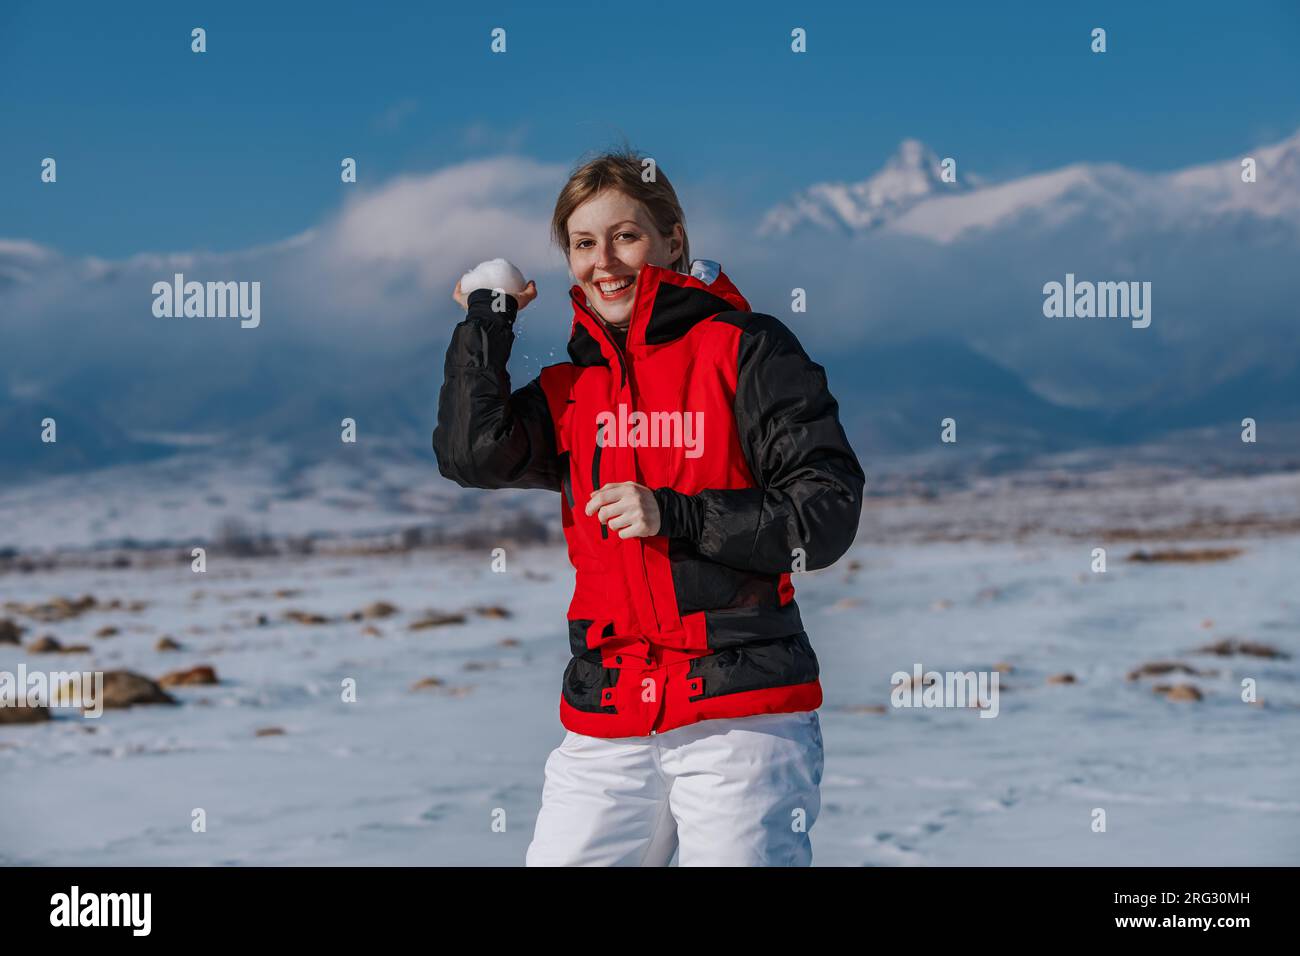 Young woman throwing a snowball on mountain background Stock Photo